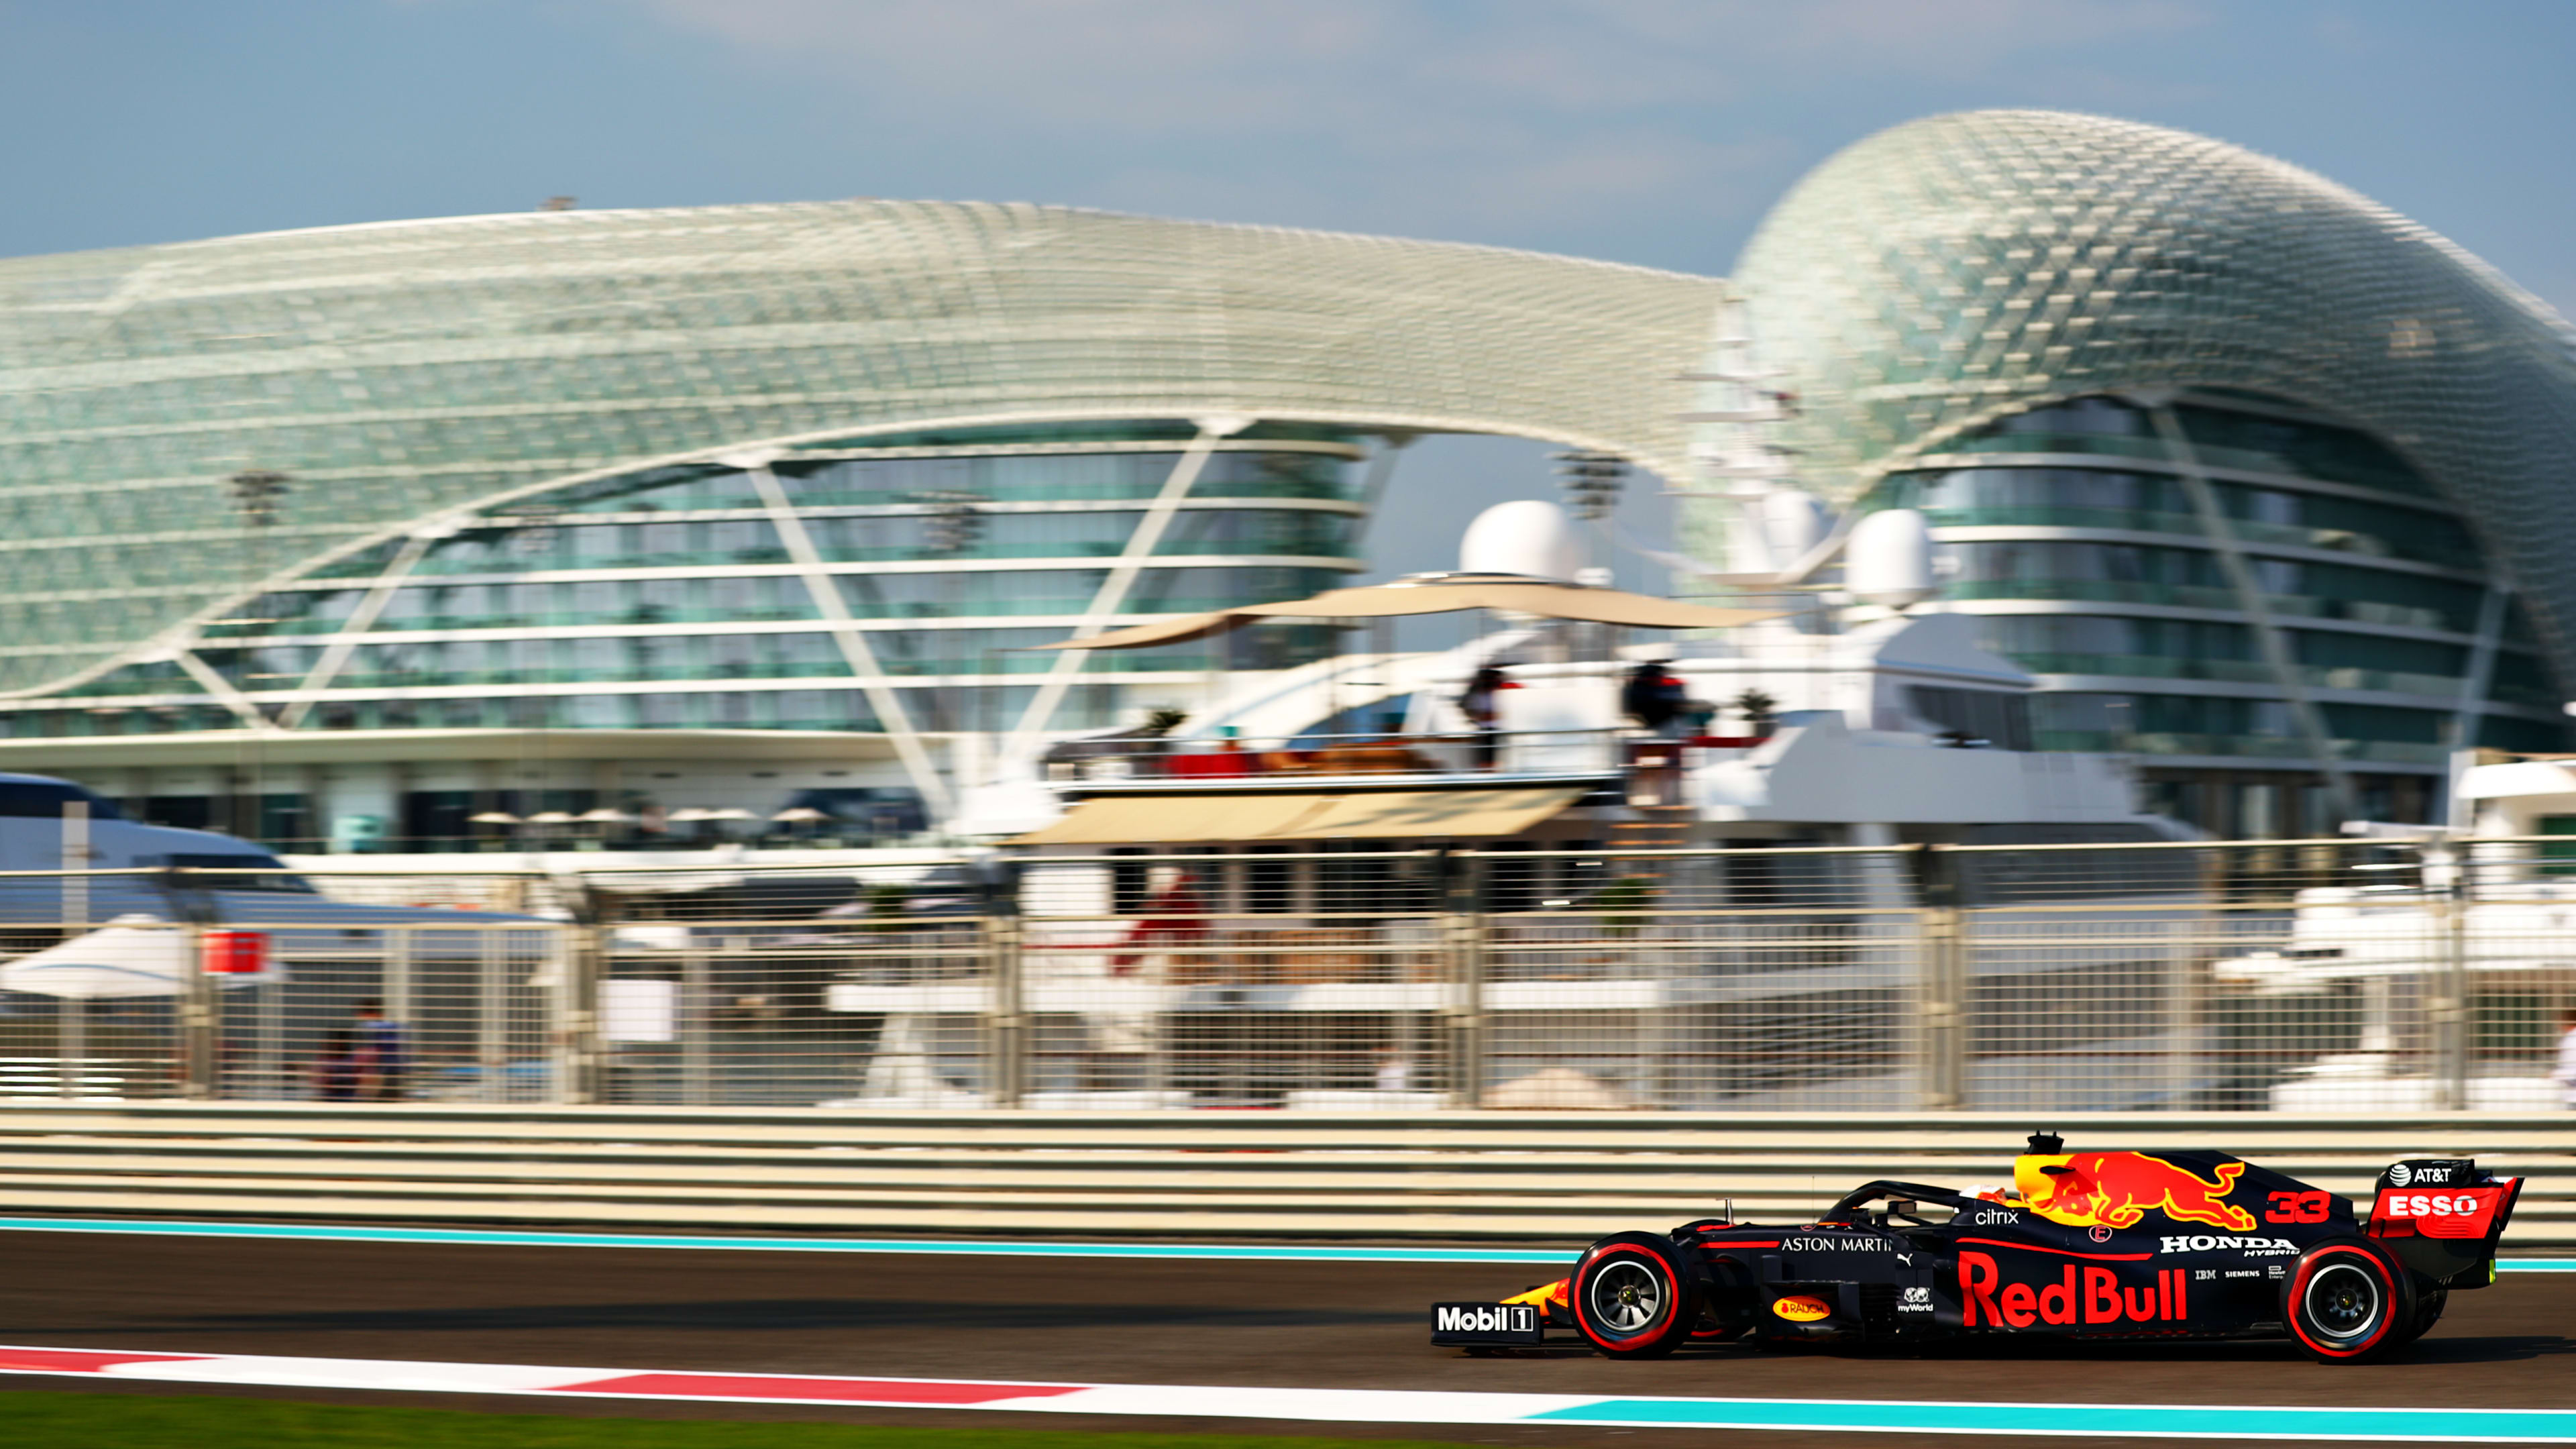 2020 Abu Dhabi Grand Prix FP3 highlights and report Verstappen leads Red Bull 1-2 ahead of Renault duo in final Yas Marina practice session Formula 1®